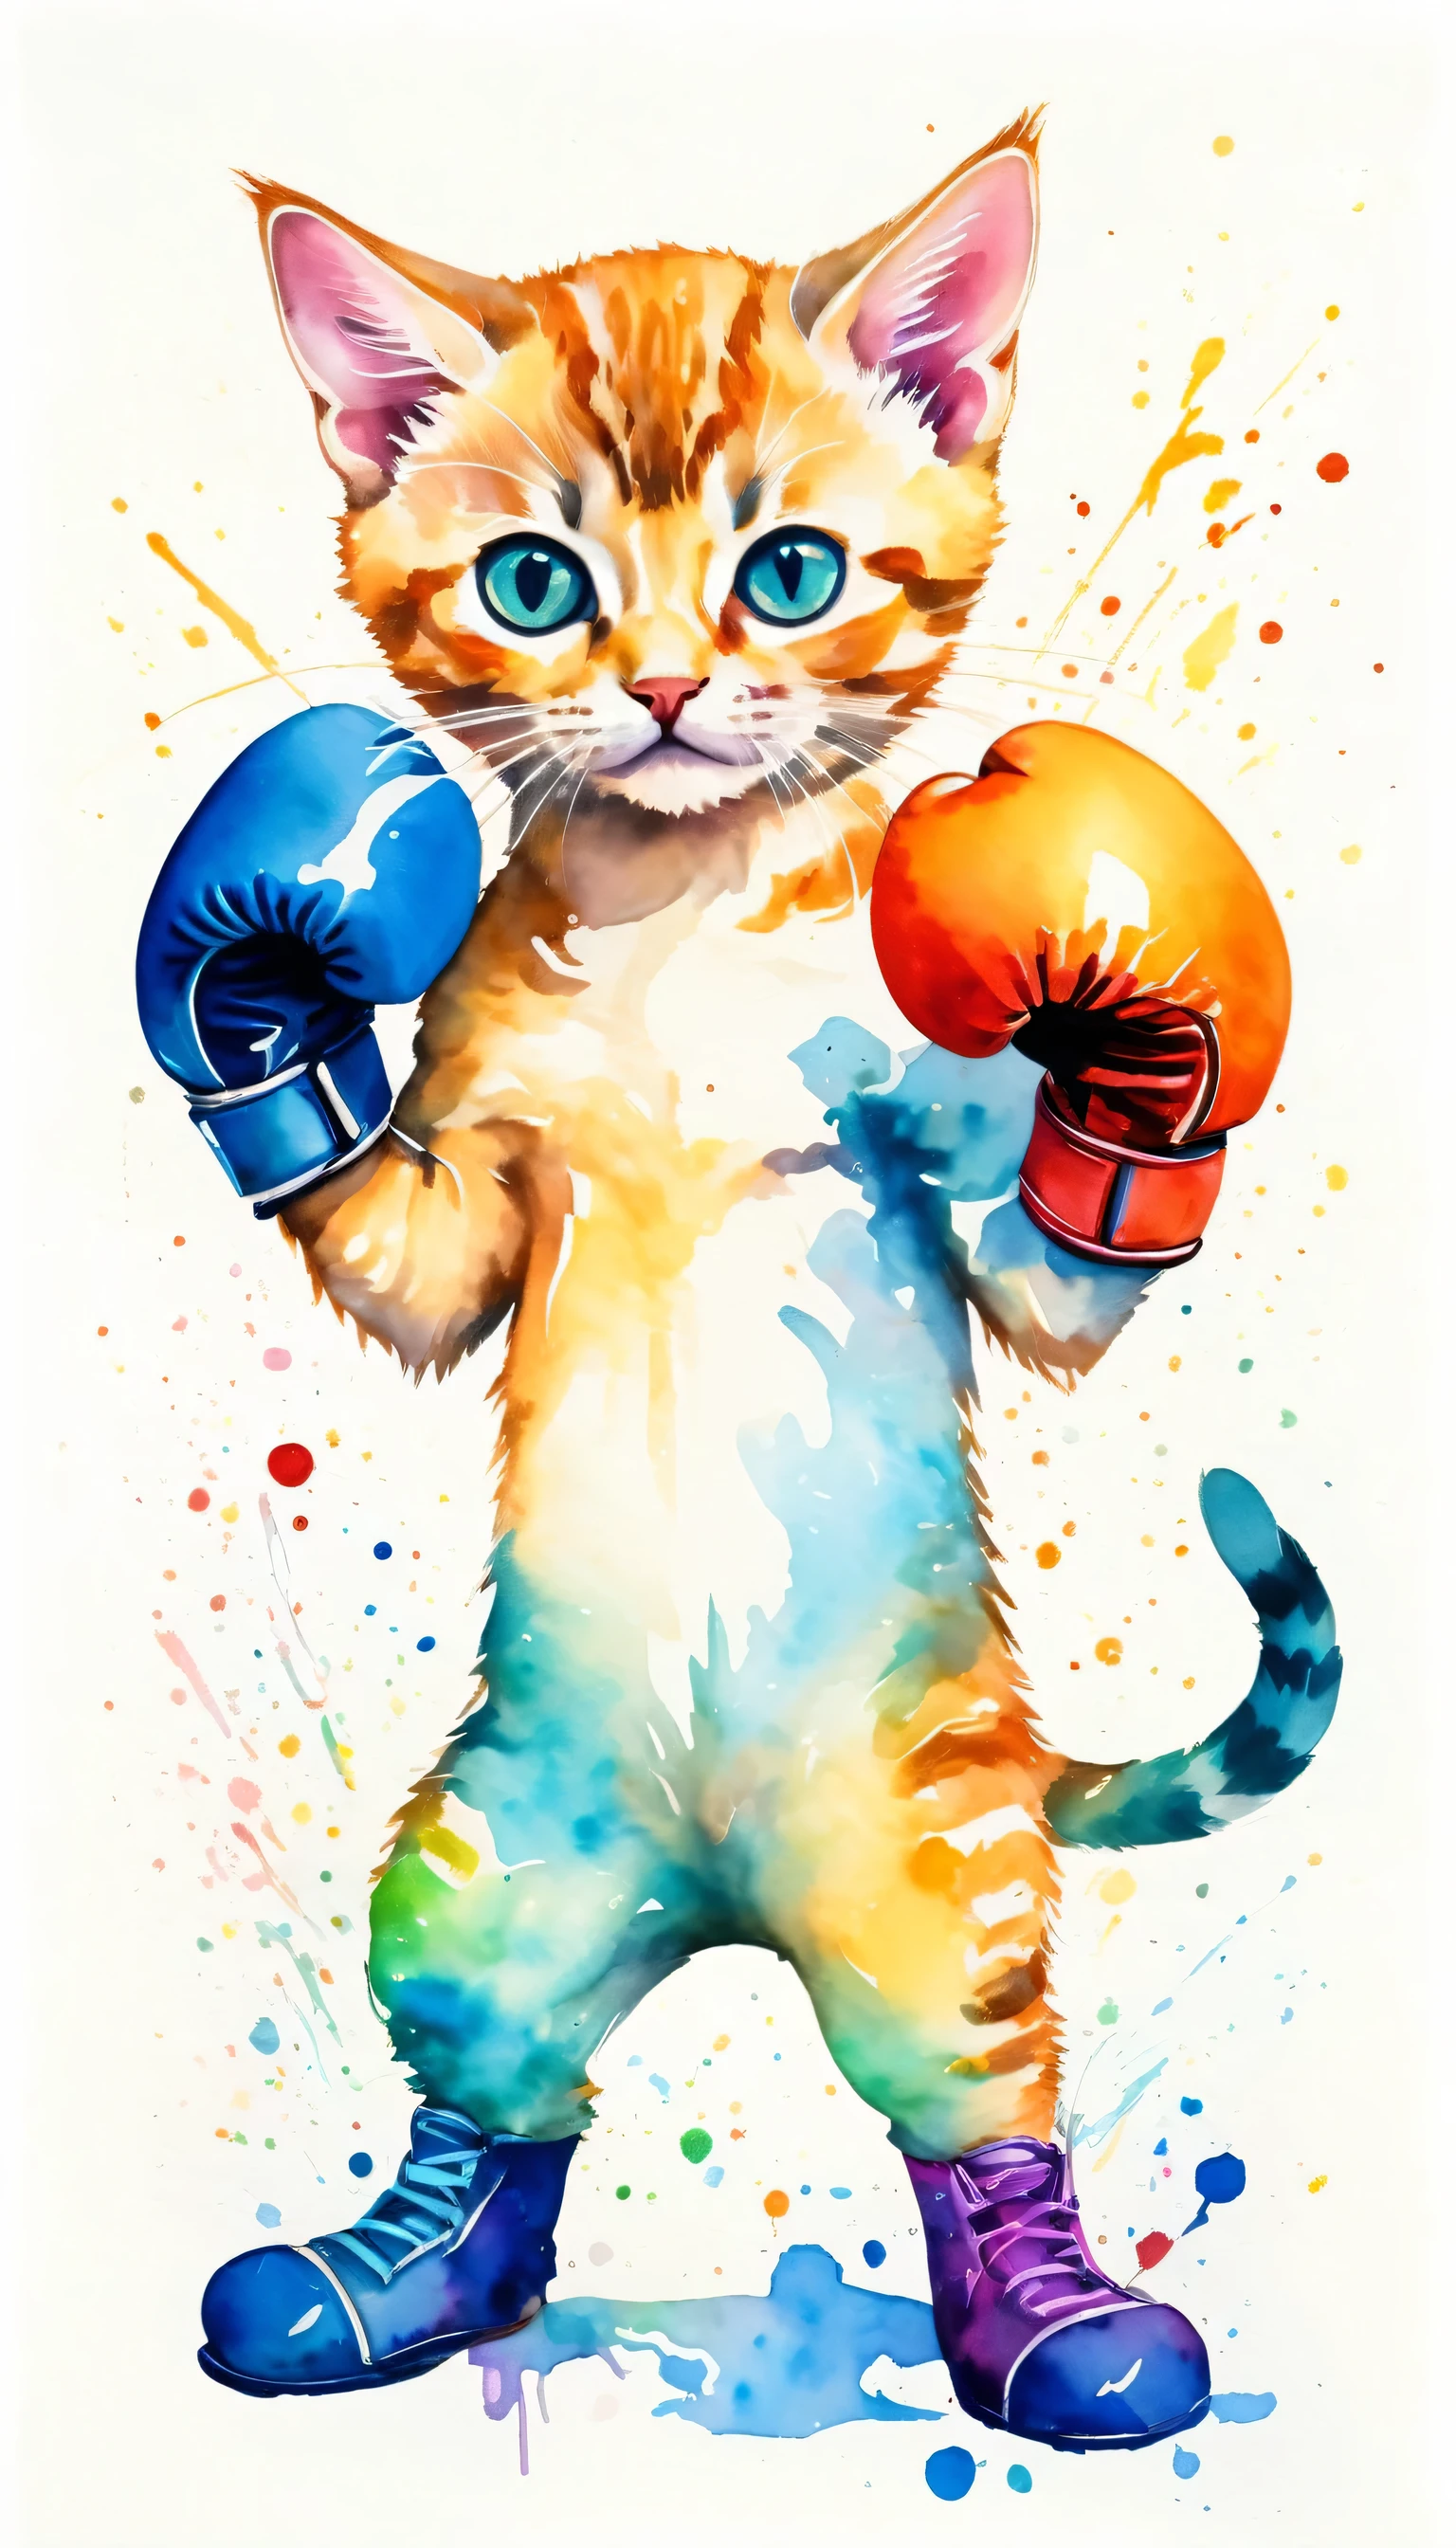 boxing kitten wearing boxing gloves, boxing, expression of defiance, animal_focus, looking_at_viewer, standing, cfunny, modern art, painting, drawing, watercolor, psychedelic colors